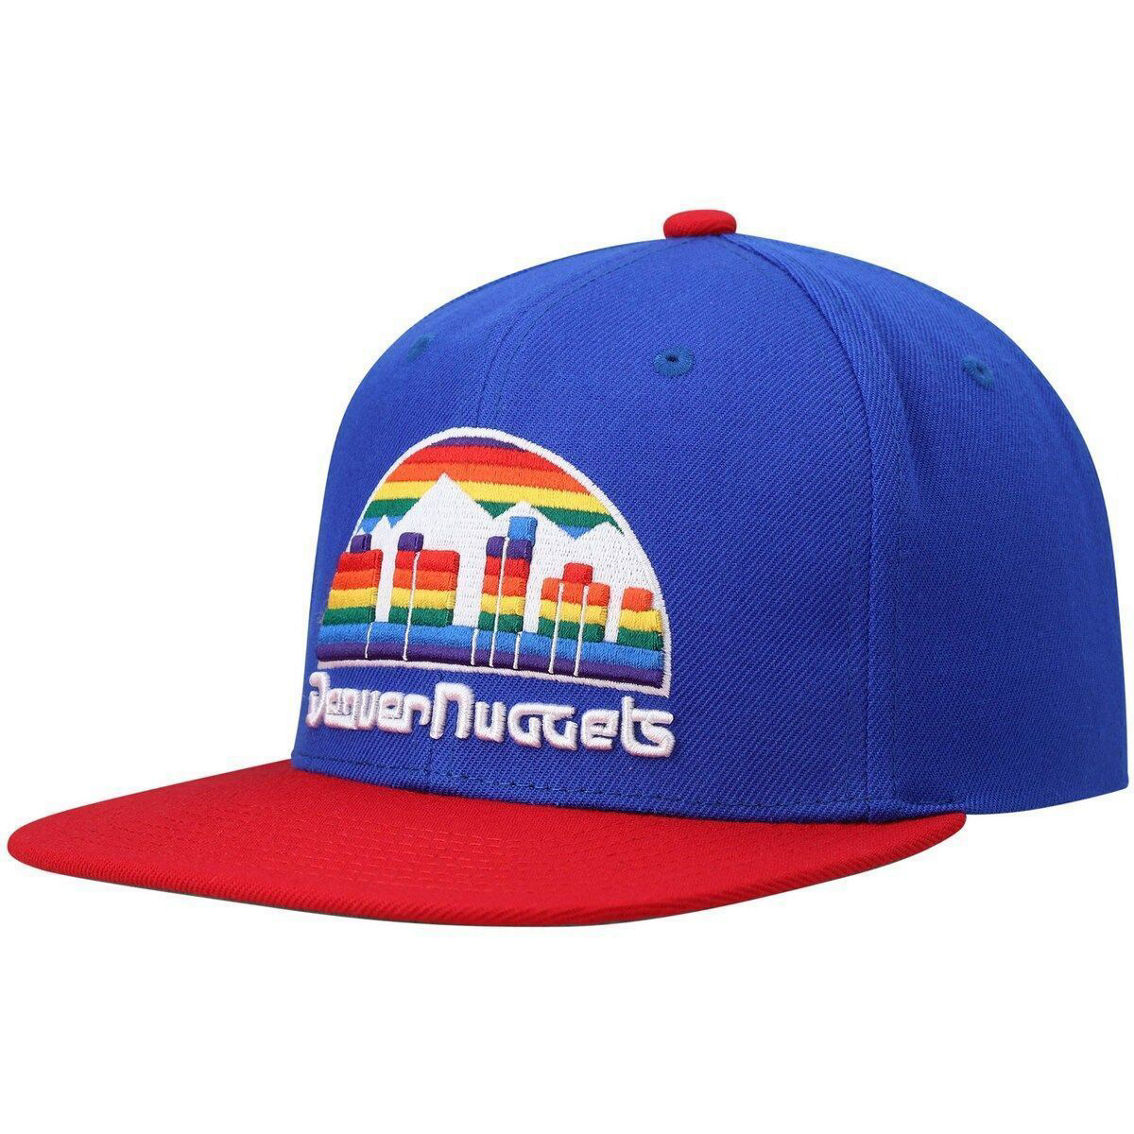 Mitchell & Ness Men's Royal/Red Denver Nuggets Hardwood Classics Team Two-Tone 2.0 Snapback Hat - Image 2 of 4